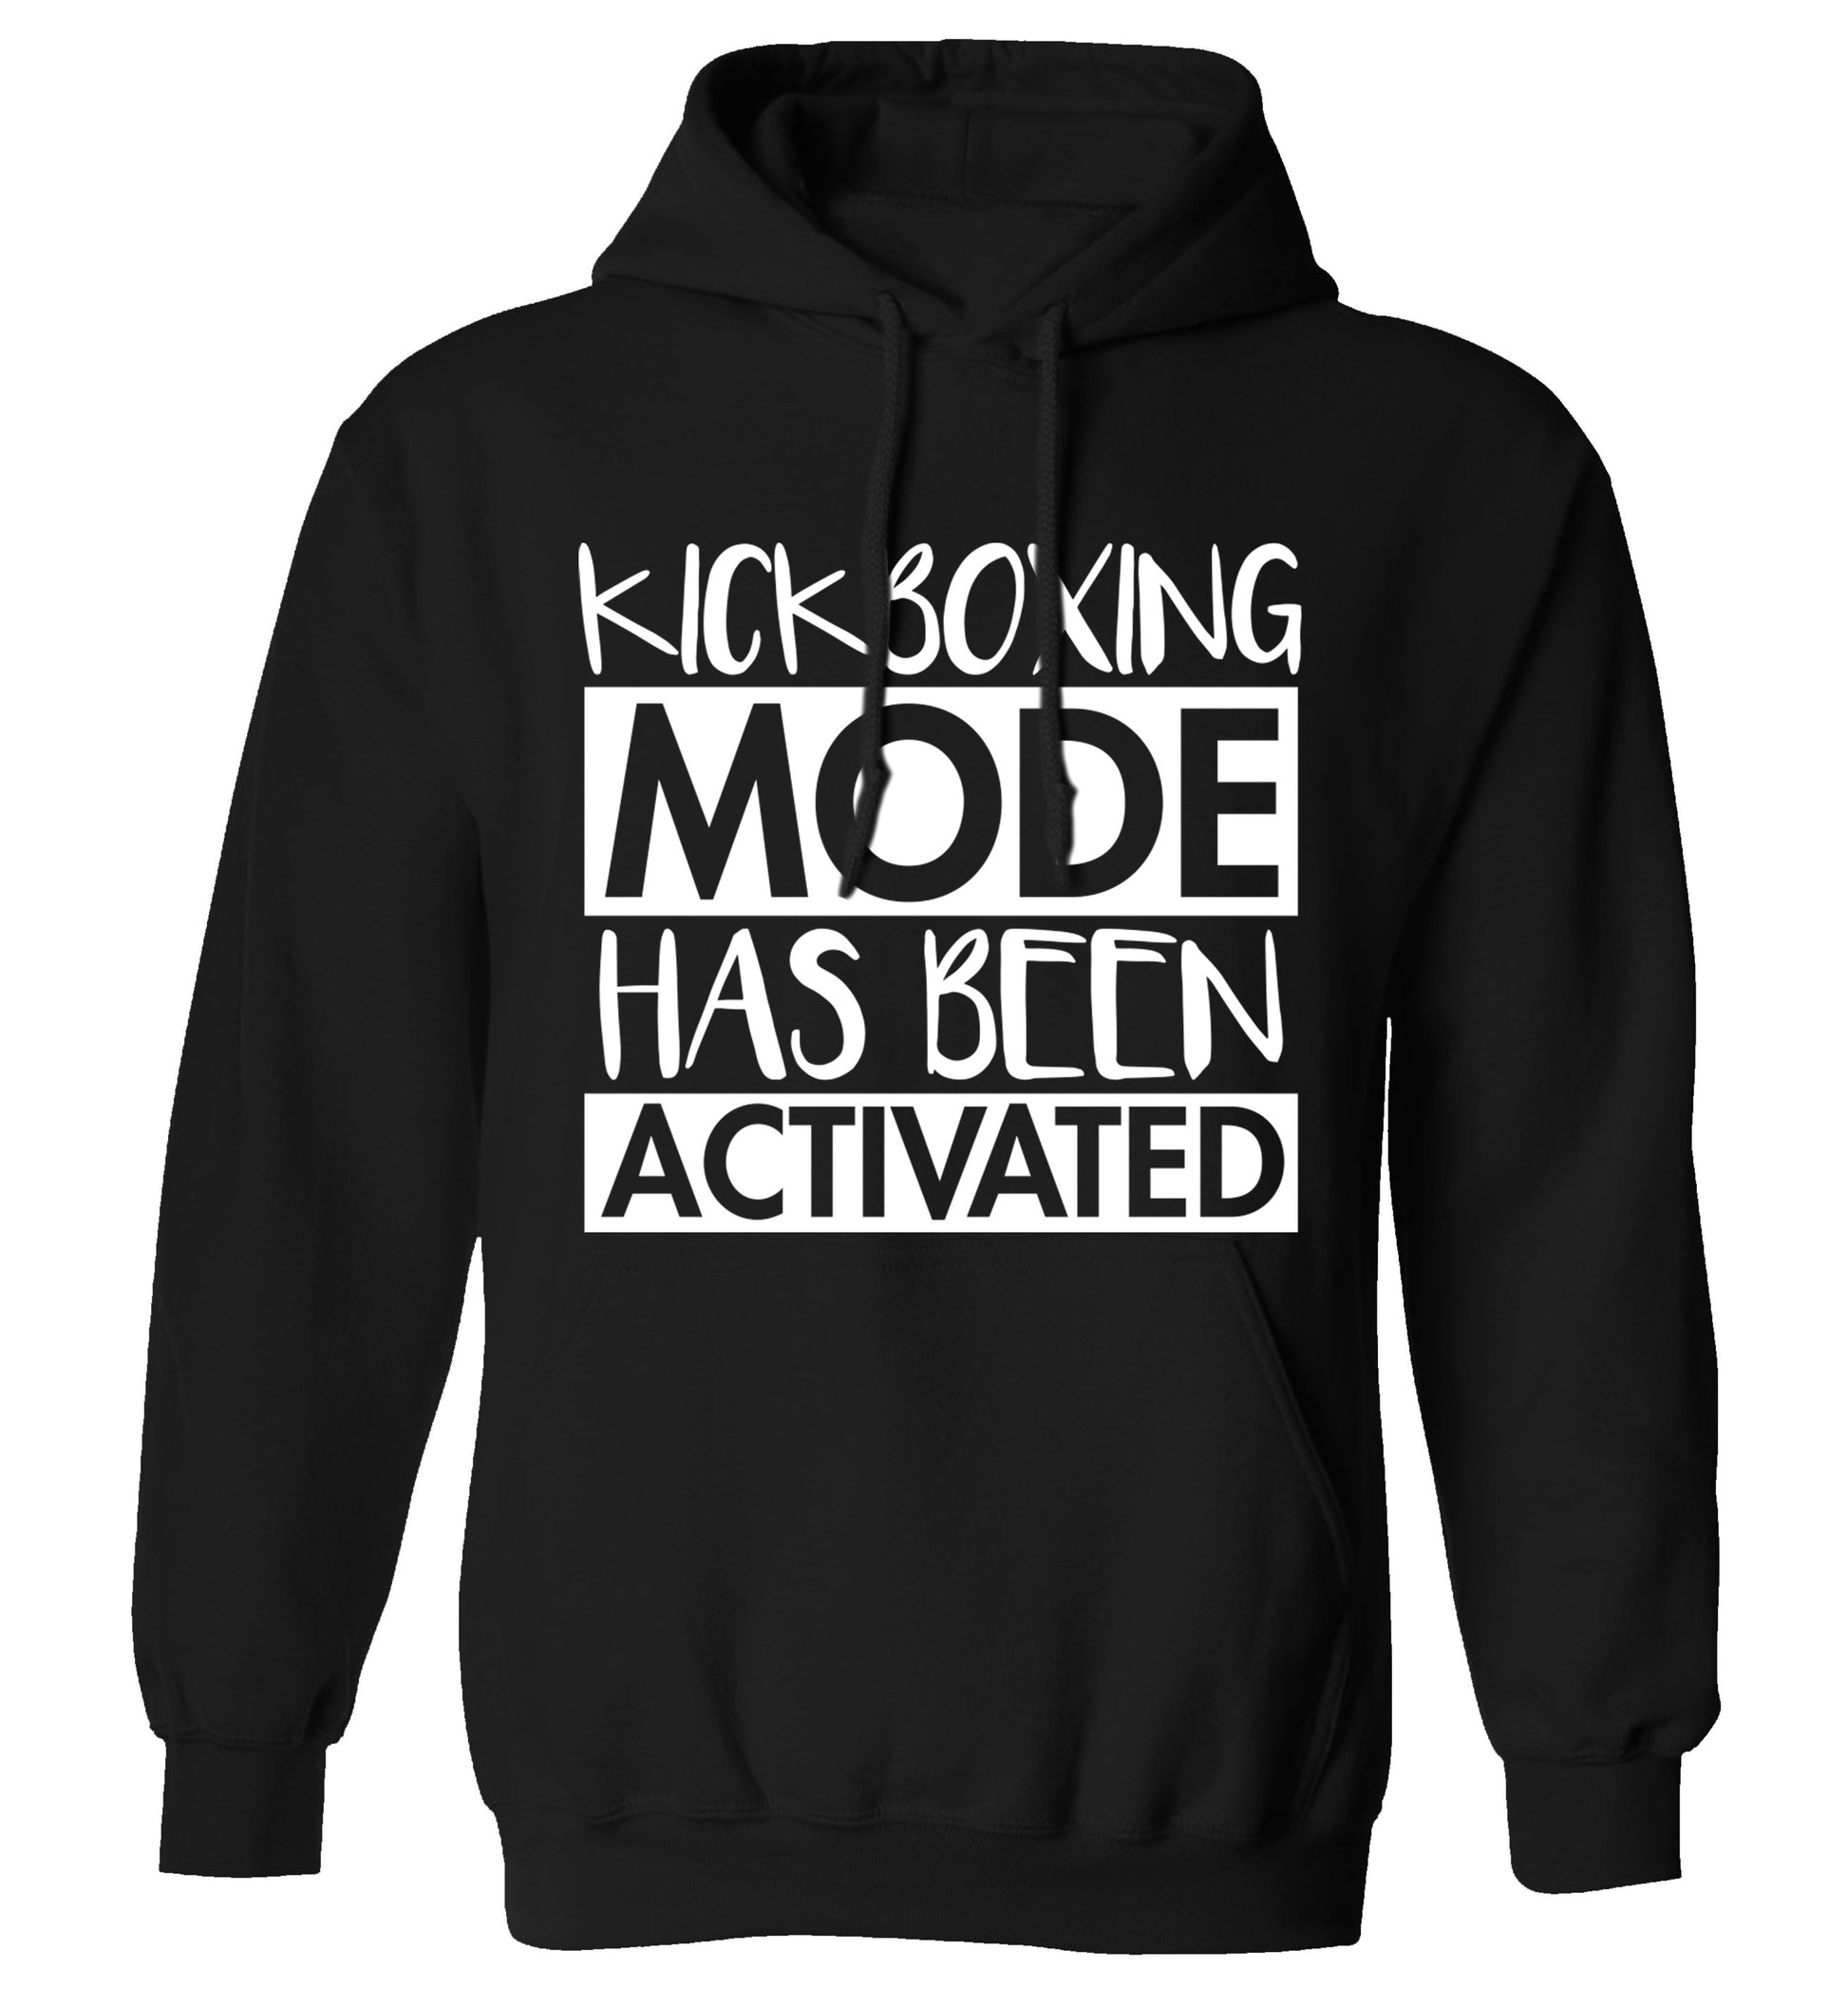 Kickboxing mode activated adults unisex black hoodie 2XL